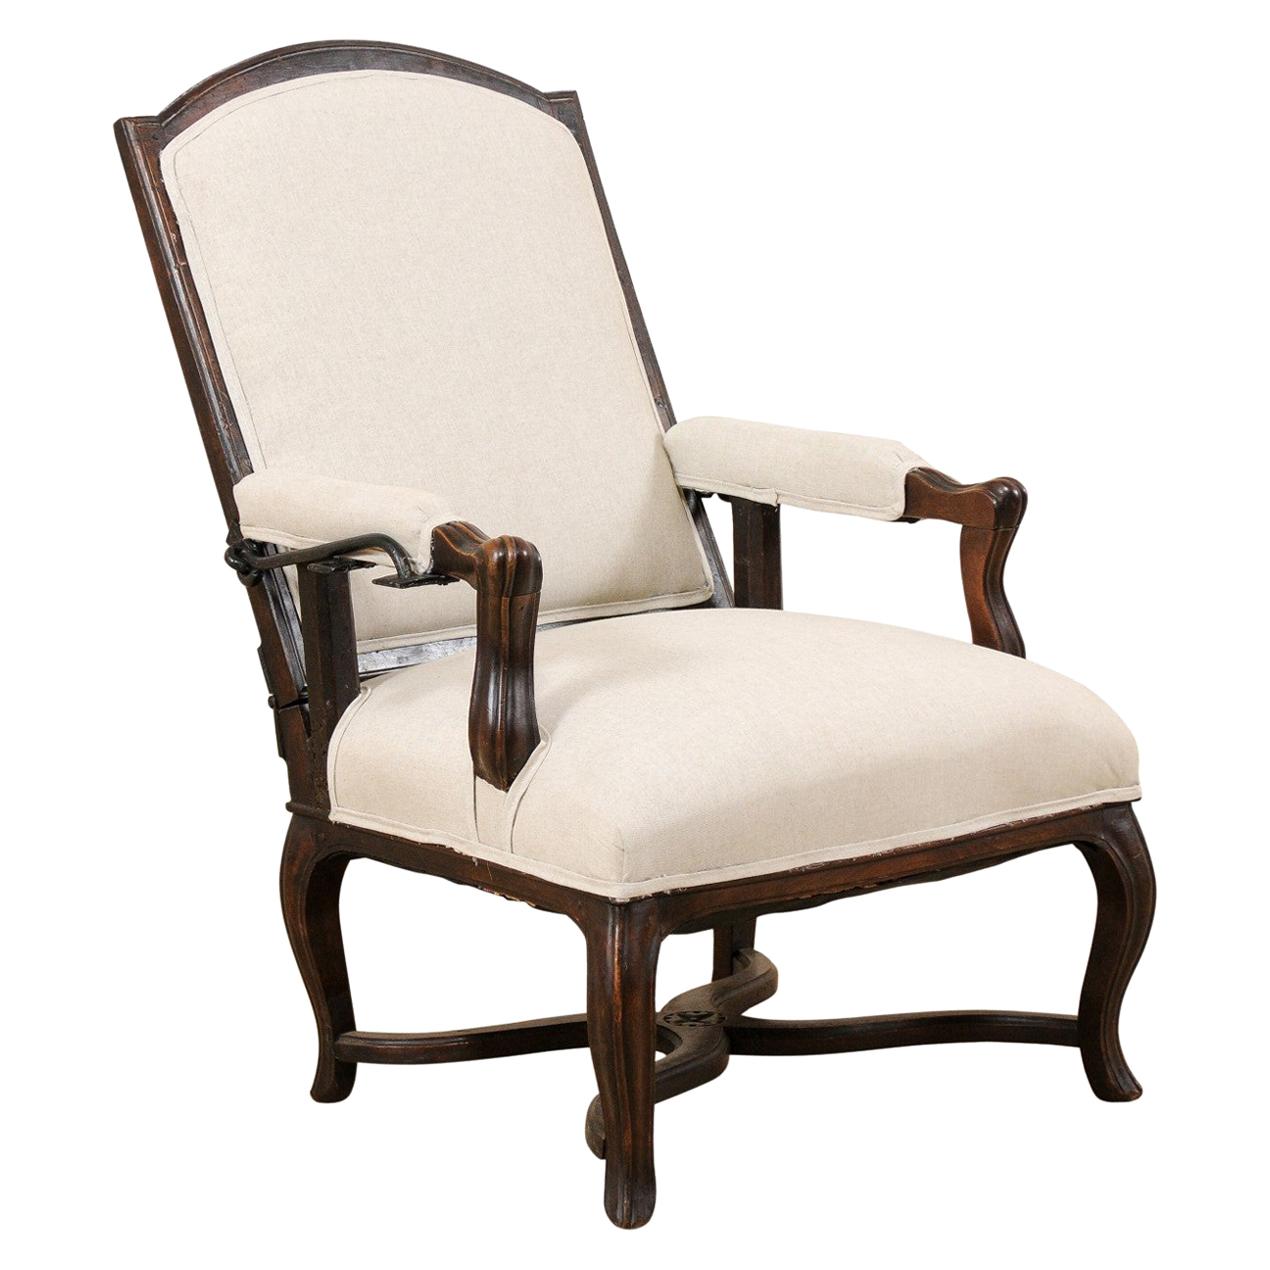 Italian 19th Century Reclining Wood and Upholstered Armchair For Sale